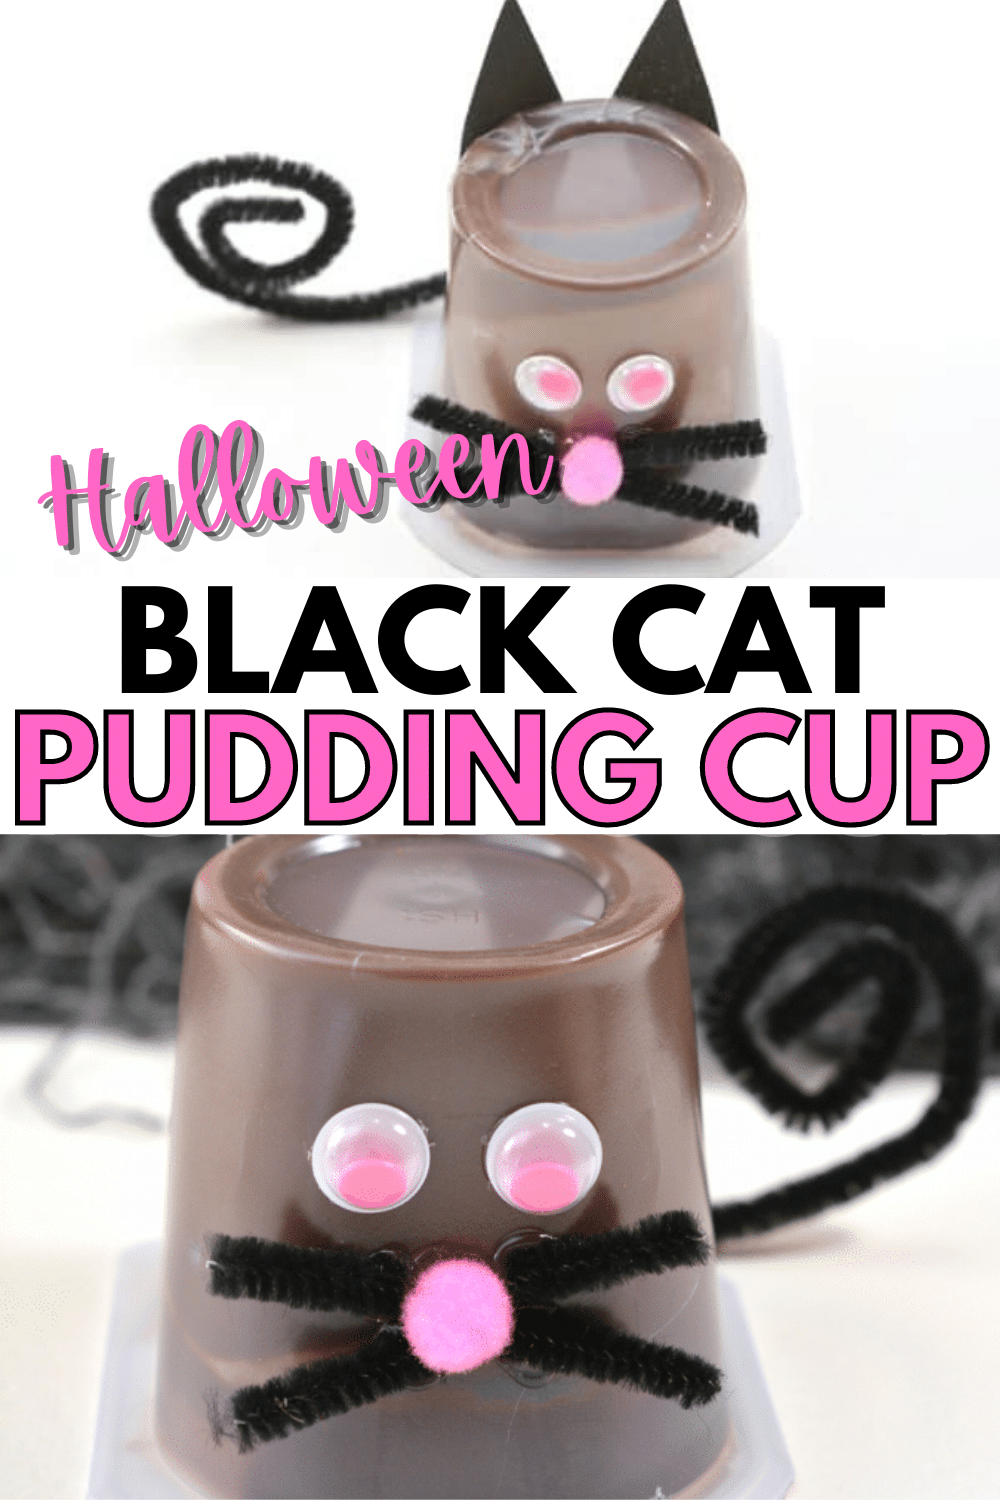 This black cat pudding cup is such a fun Halloween treat idea and it's super easy! #Halloween #treats #crafts #funfood via @wondermomwannab